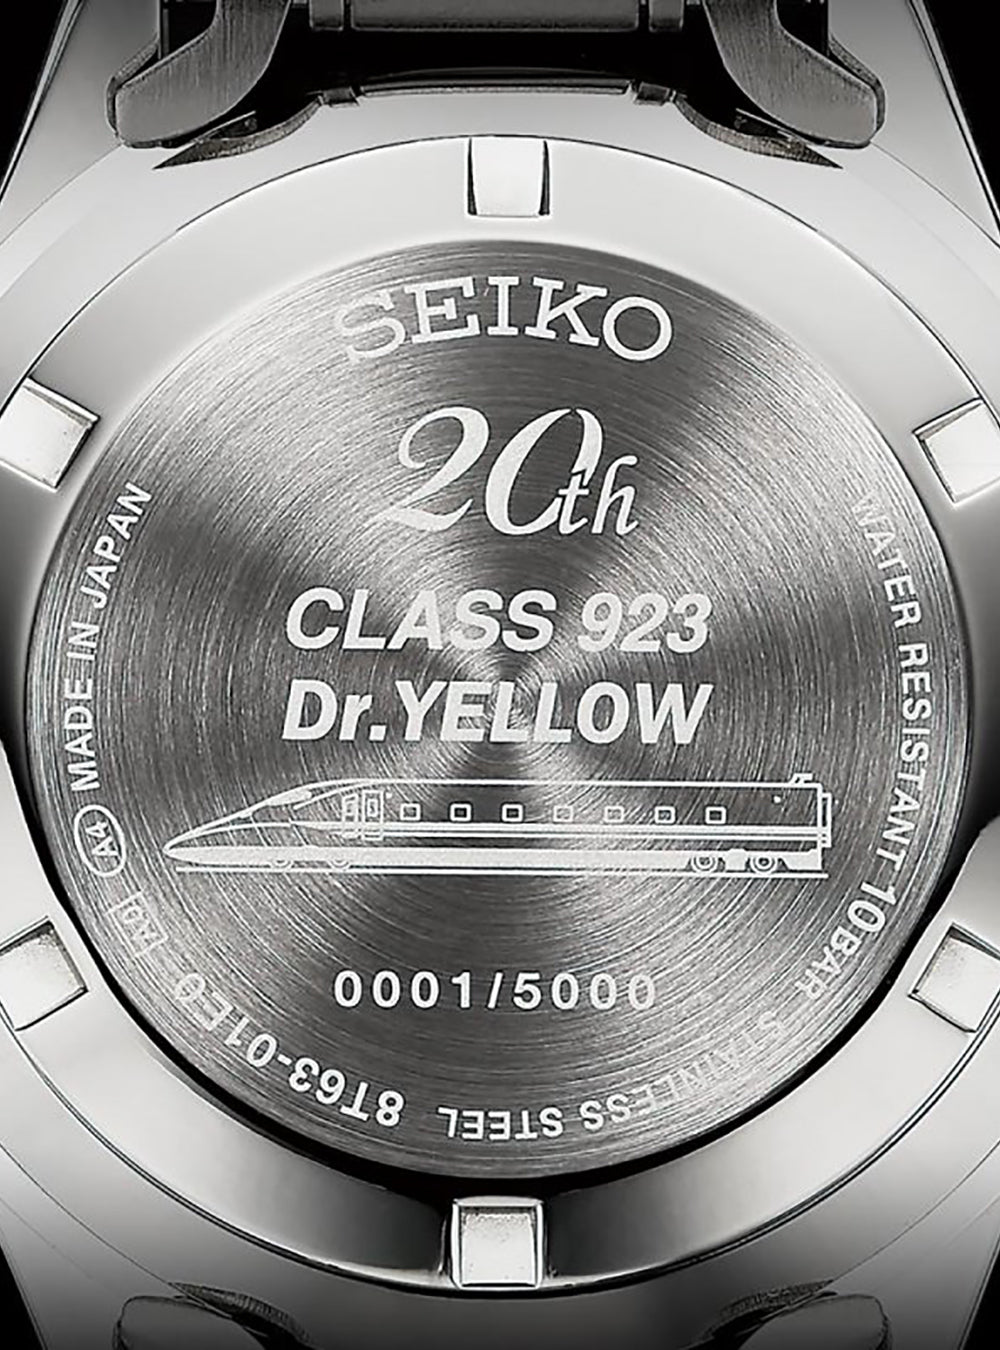 SEIKO × JR WEST 20TH ANNIVERSARY CLASS 923 DR.YELLOW MADE IN JAPAN 